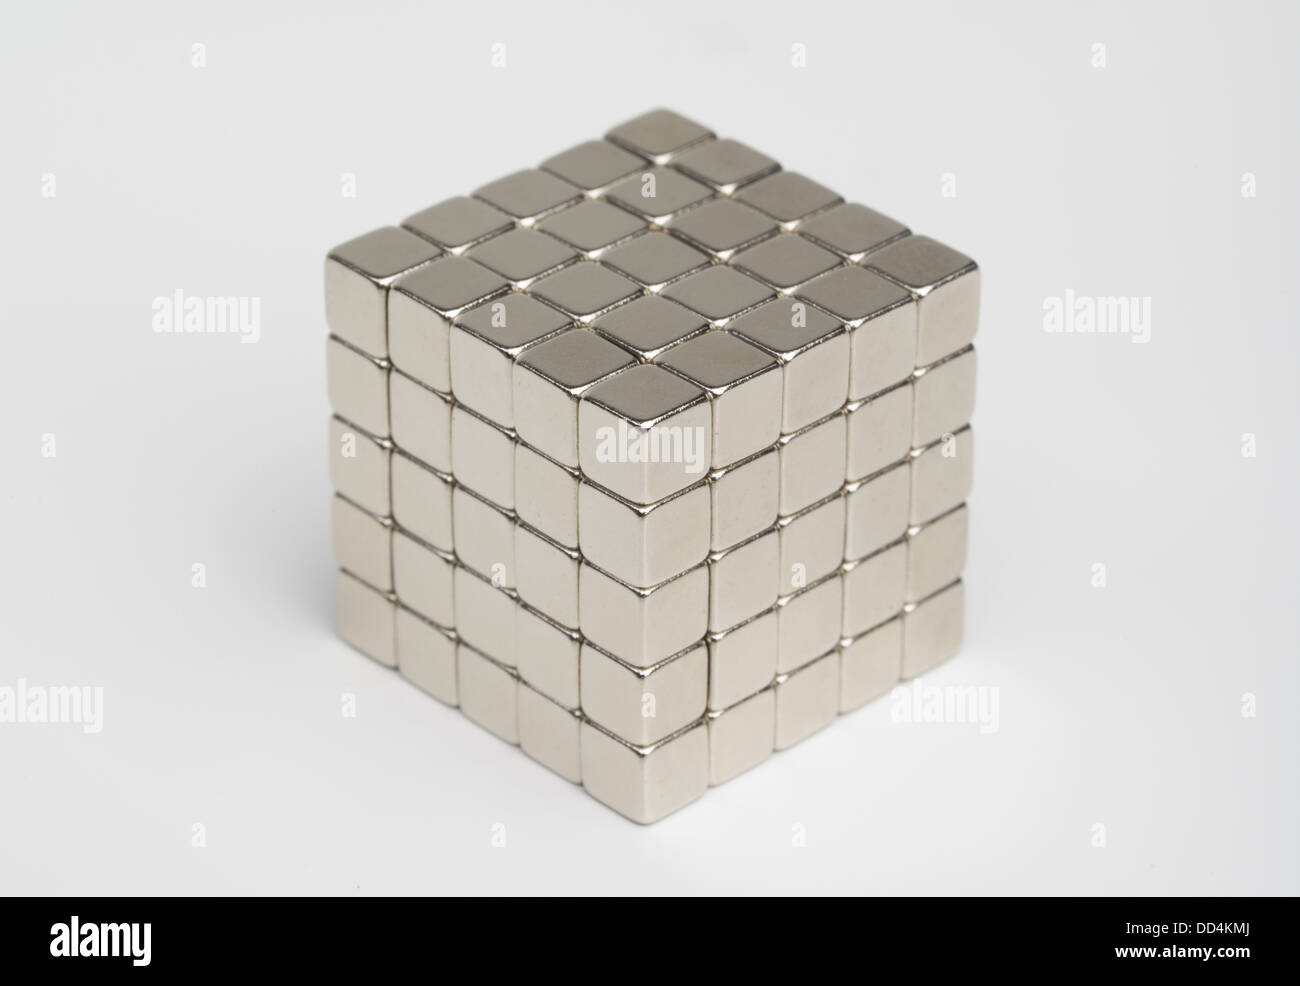 Neodymium magnet educational toy. Nickel-plated magnetic cubes. Toys banned in the US due to cases of children swallowing them . Stock Photo